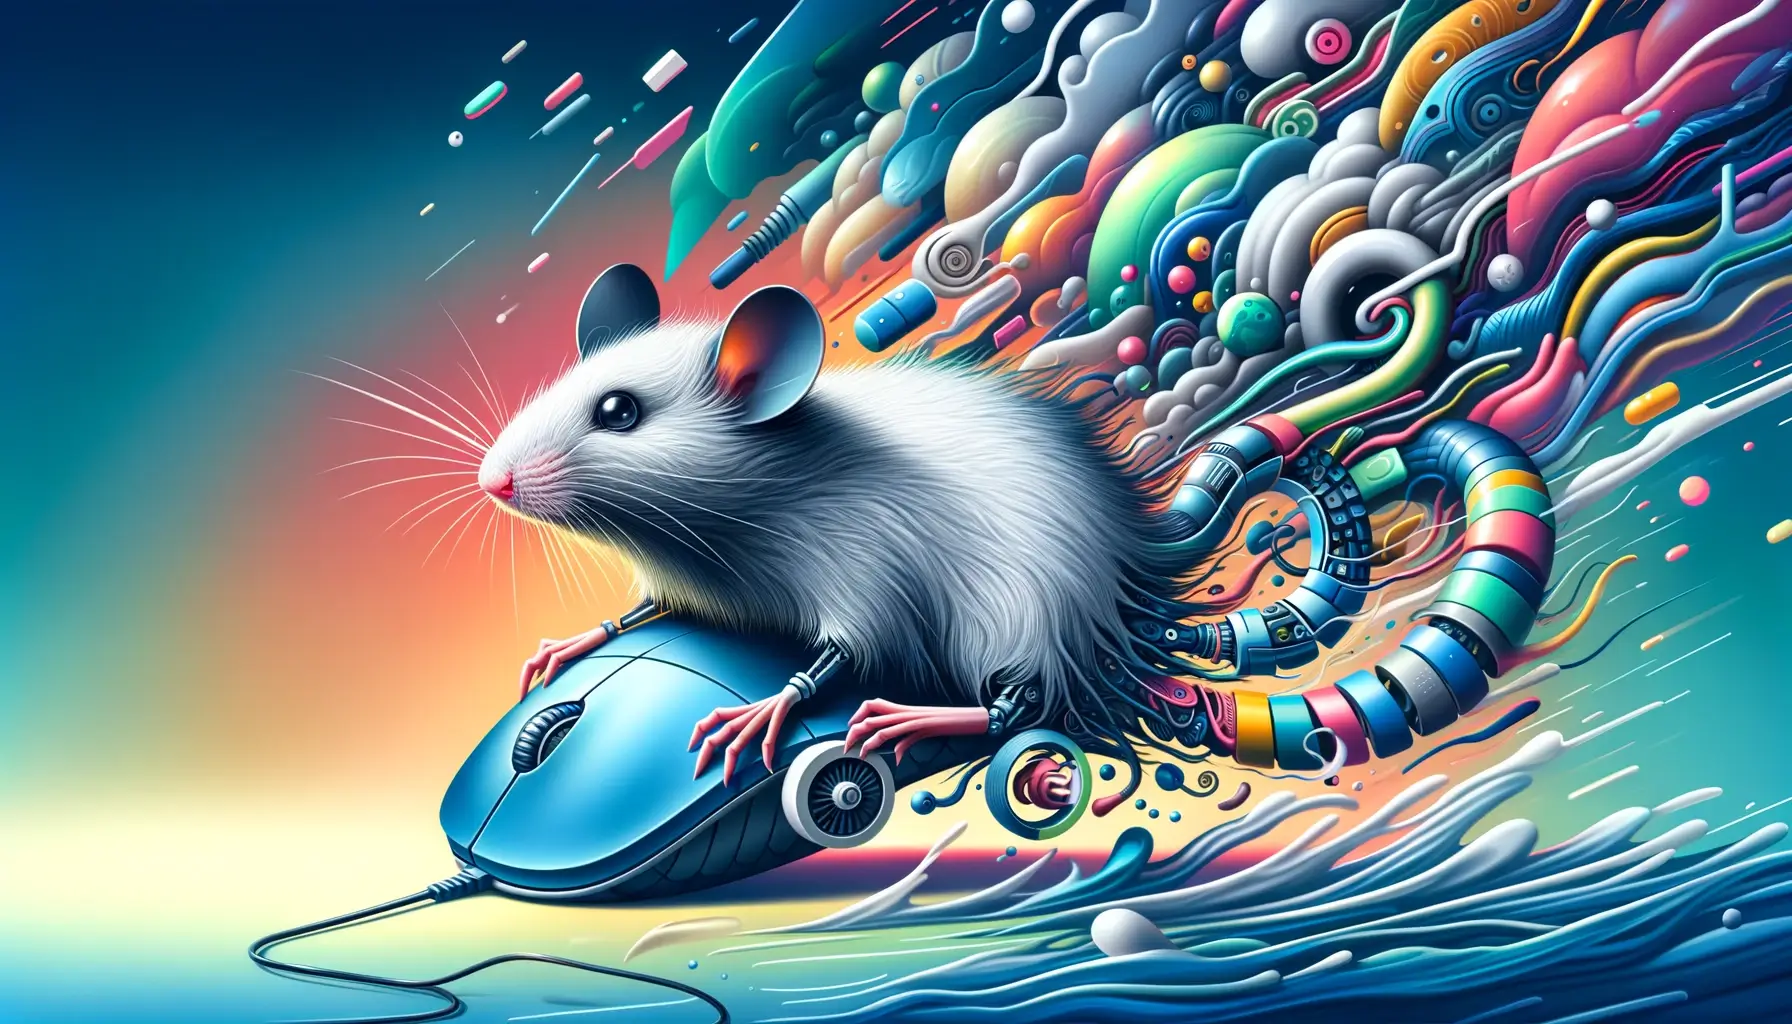 Abstract image of computer mouse